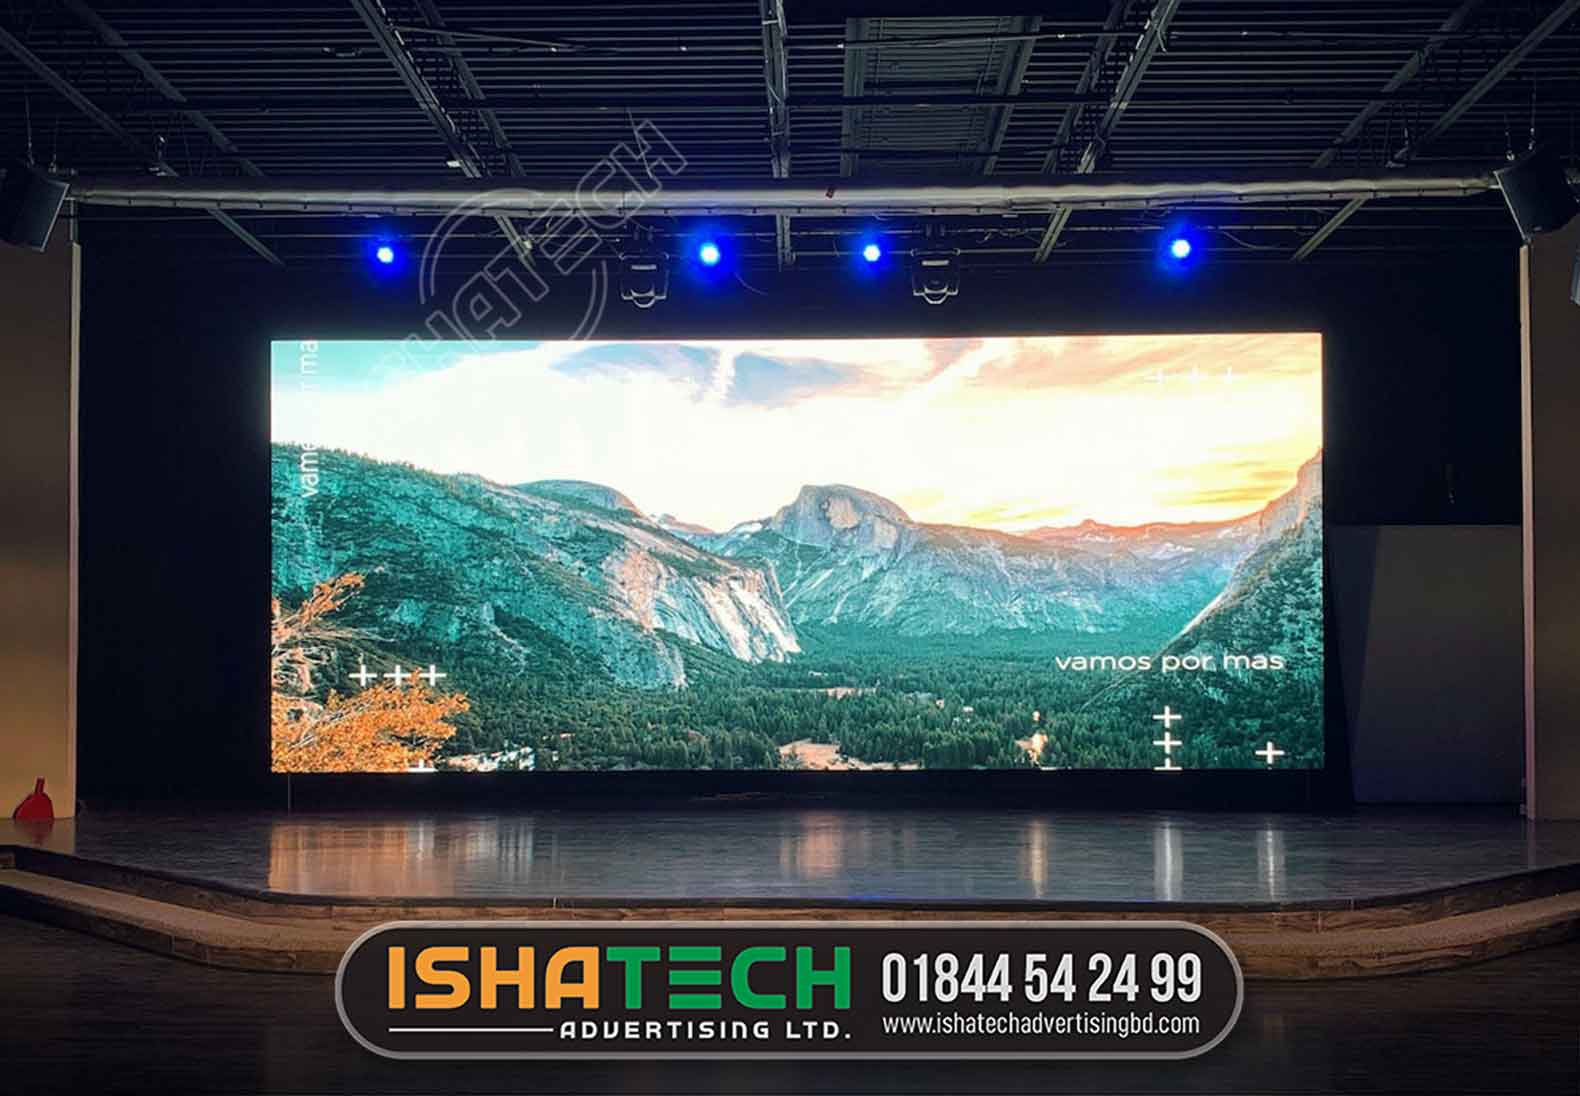 The Prospect of LED Display Board Small Spacing in Intelligent Meeting 2017 P2.5 below the small spacing sales volume of 7 billion 592 million yuan. The growth rate of China's local market is 68.27%. Export market growth rate of 60%. The market share of the conference shows a large proportion in the growth of small spacing sales. The deepening and expansion of market participants also led to the growth of small spacing sales bd